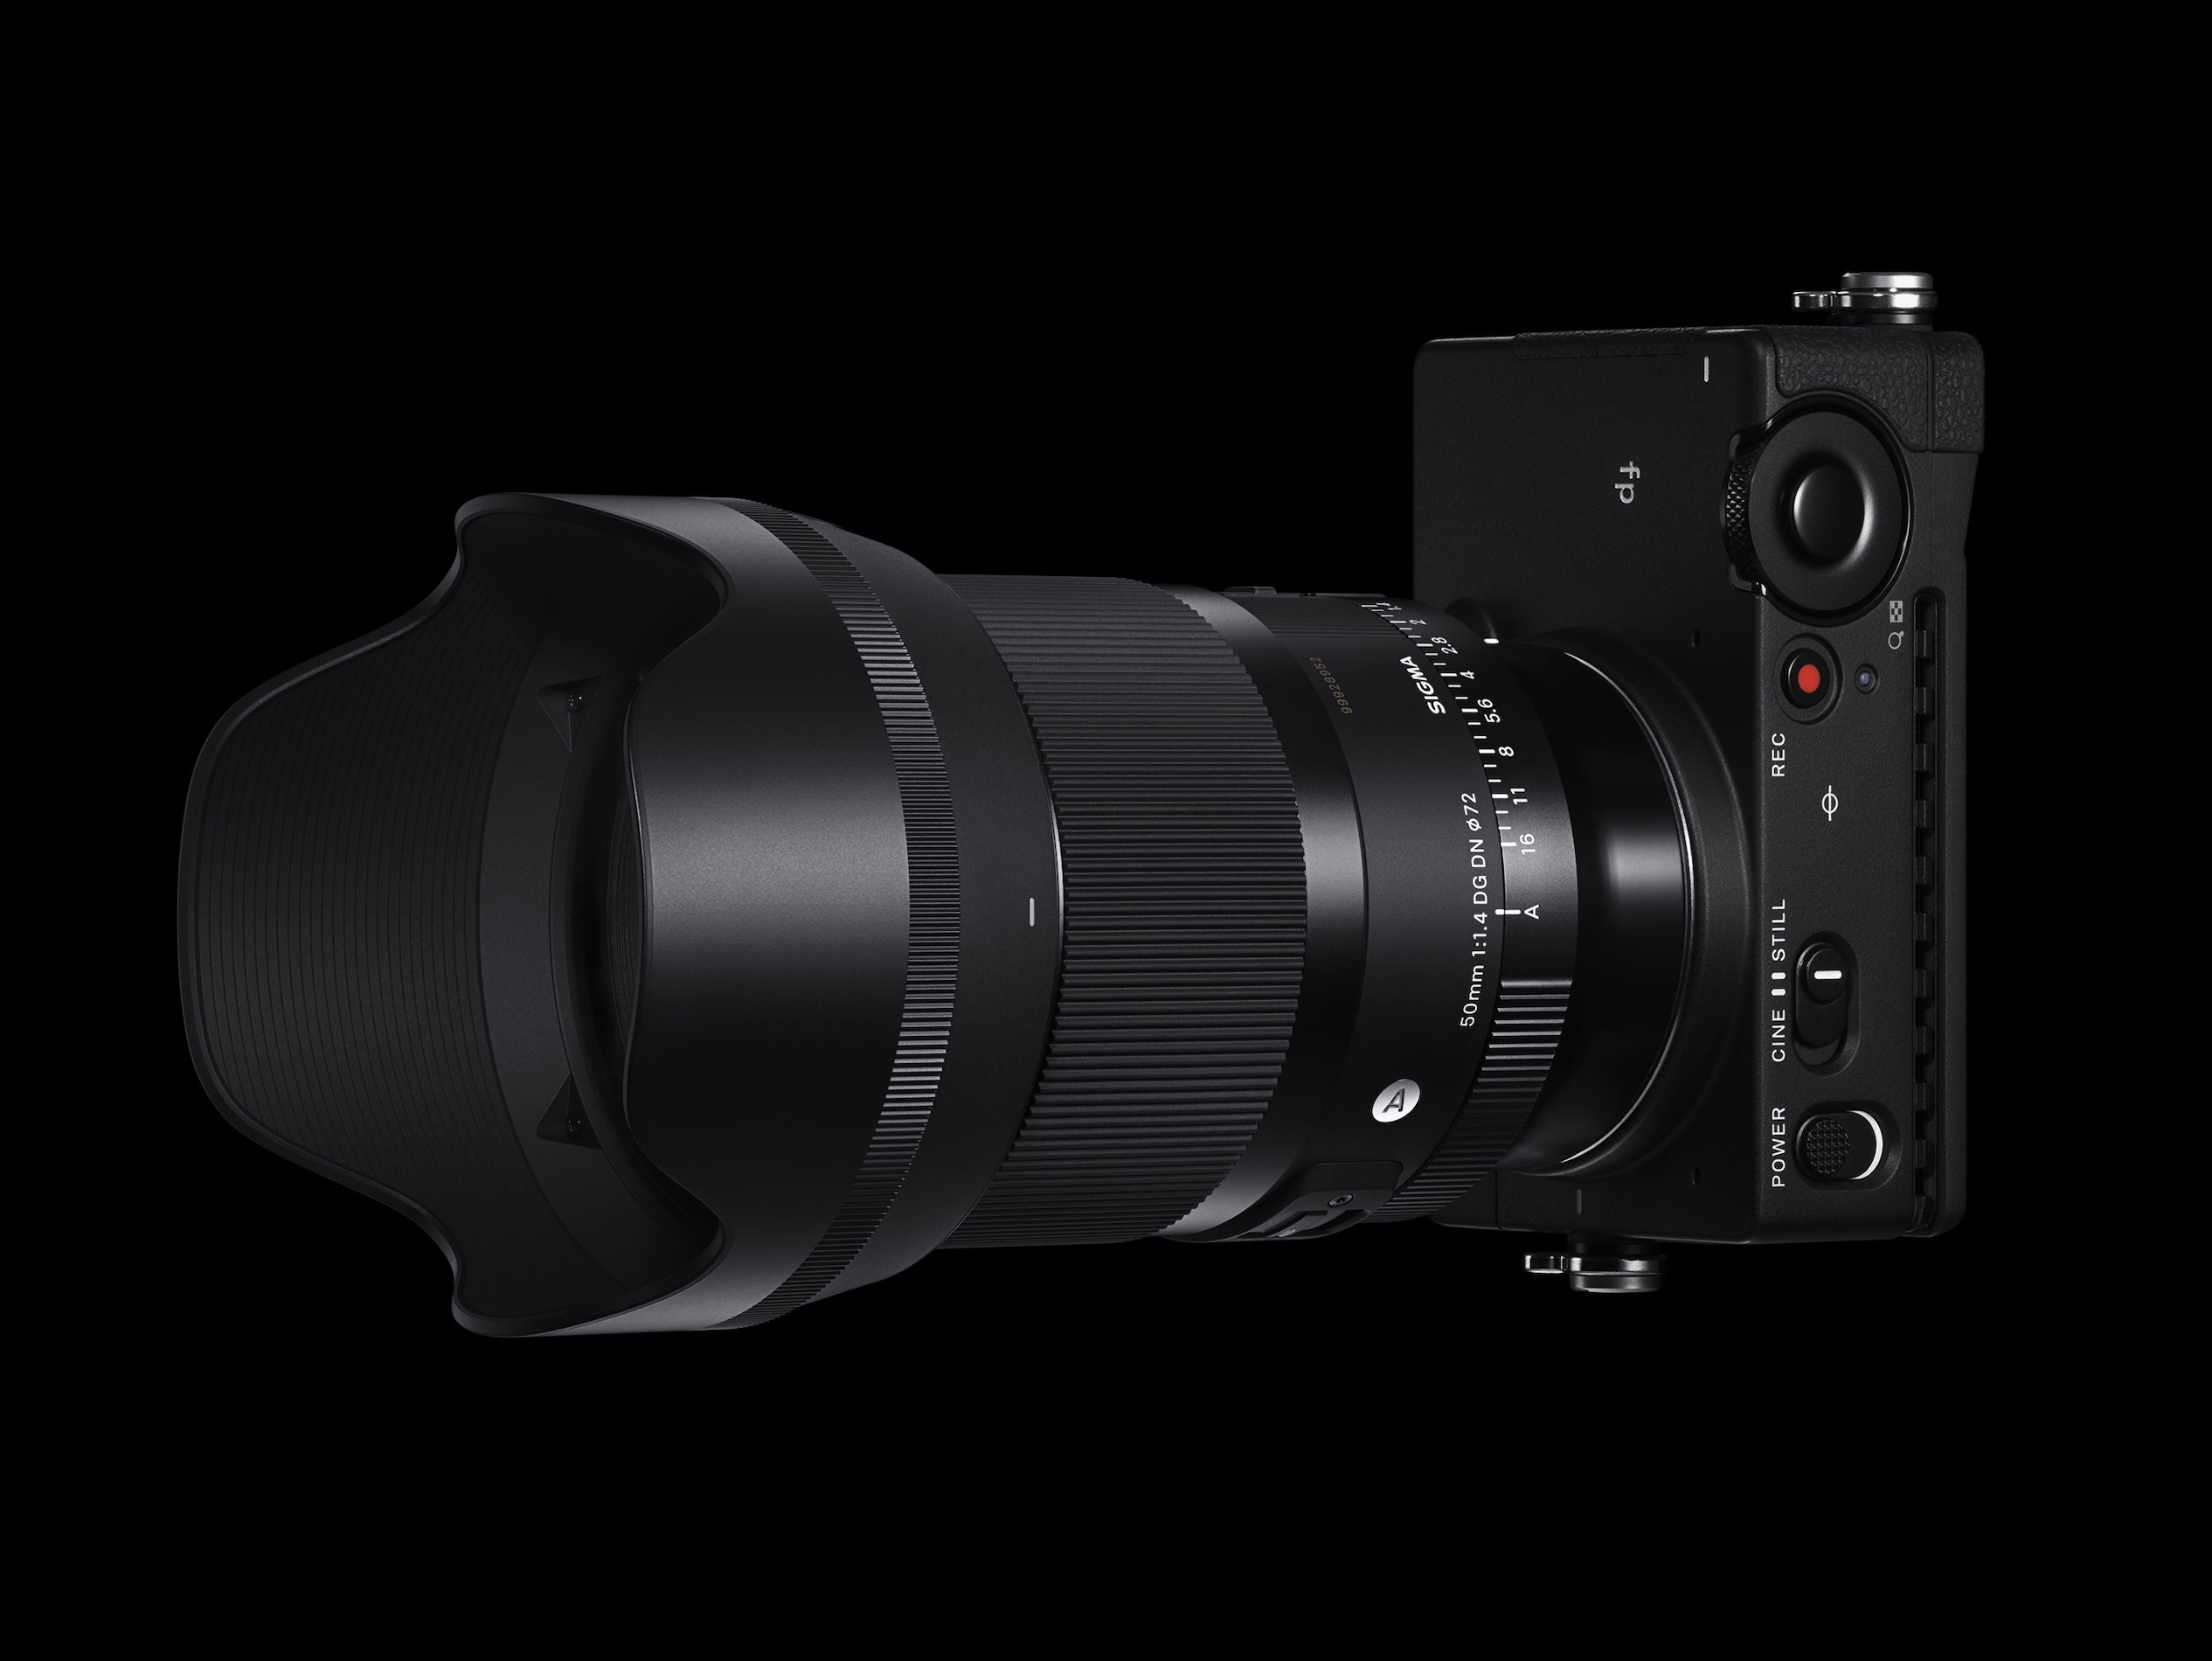 Sigma Releases 50mm F1.4 DG DN Art Lens - The American Society of